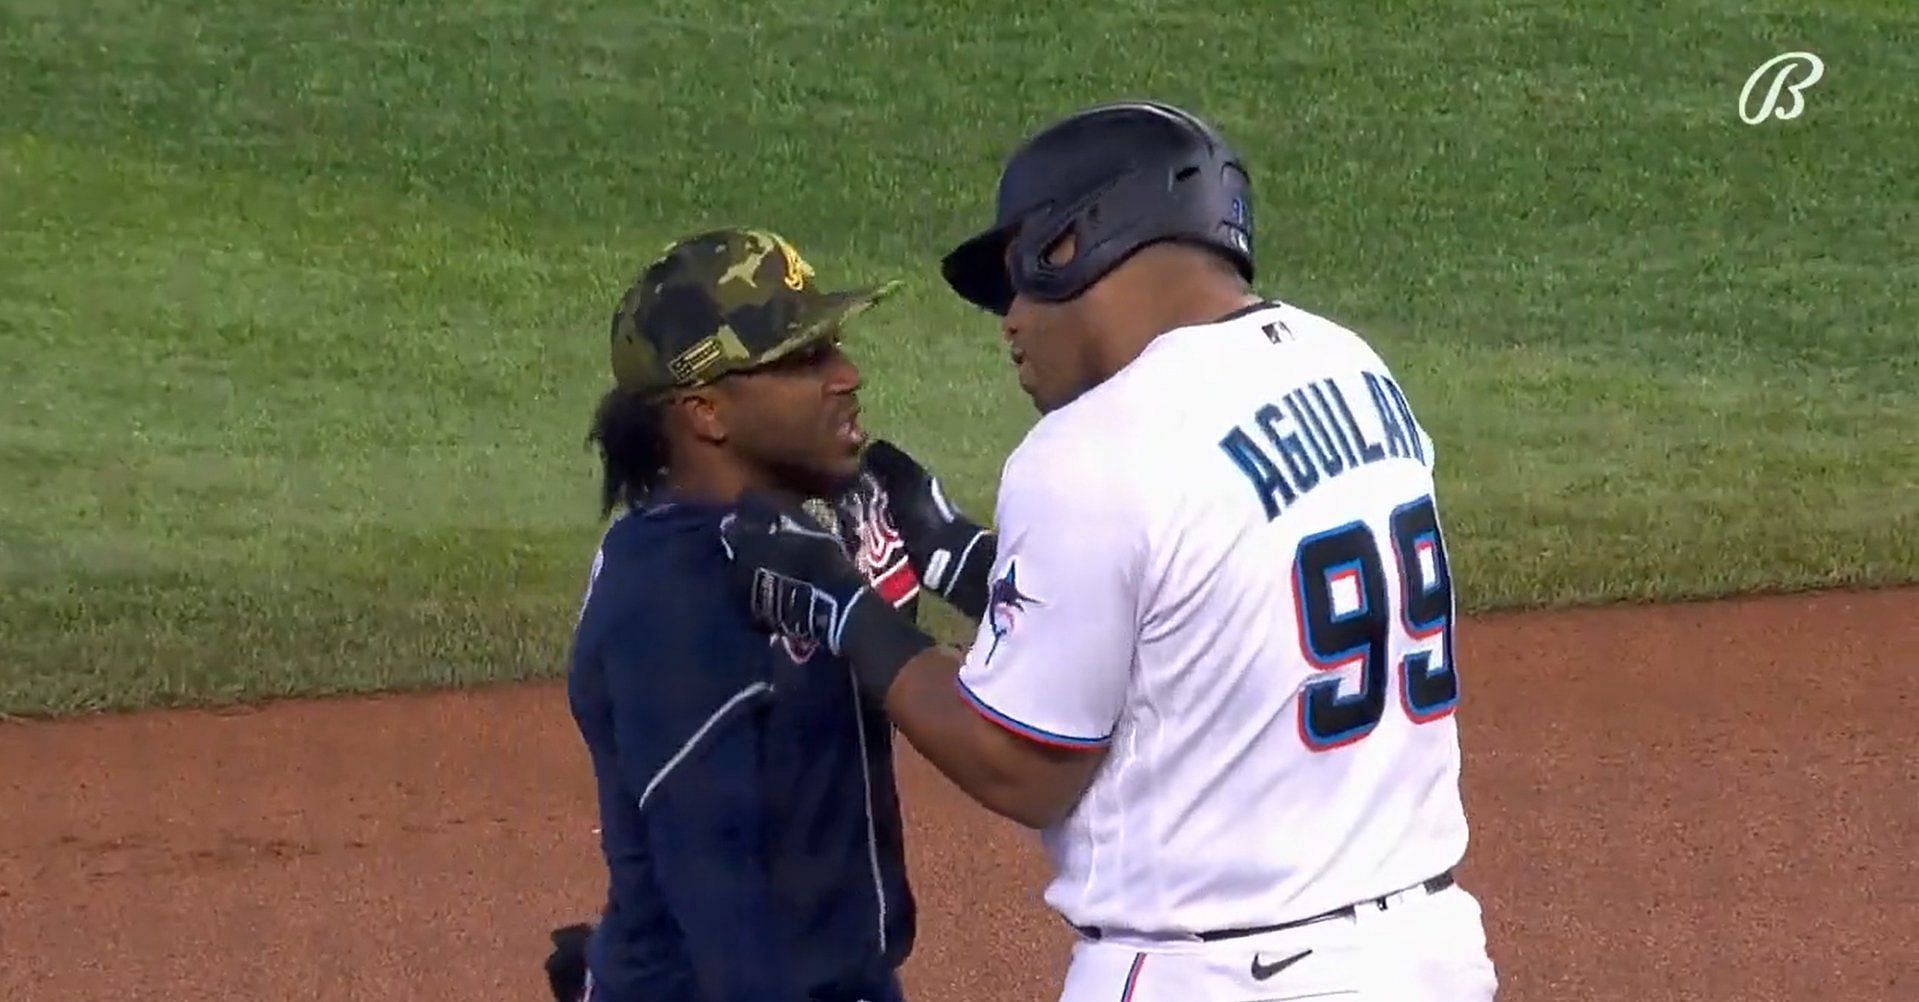 He's literally two Ozzies! Ozzie just makes baseball fun to watch!!! -  MLB Twitter reacts to hilarious interaction between Ozzie Albies and Jesus  Aguilar